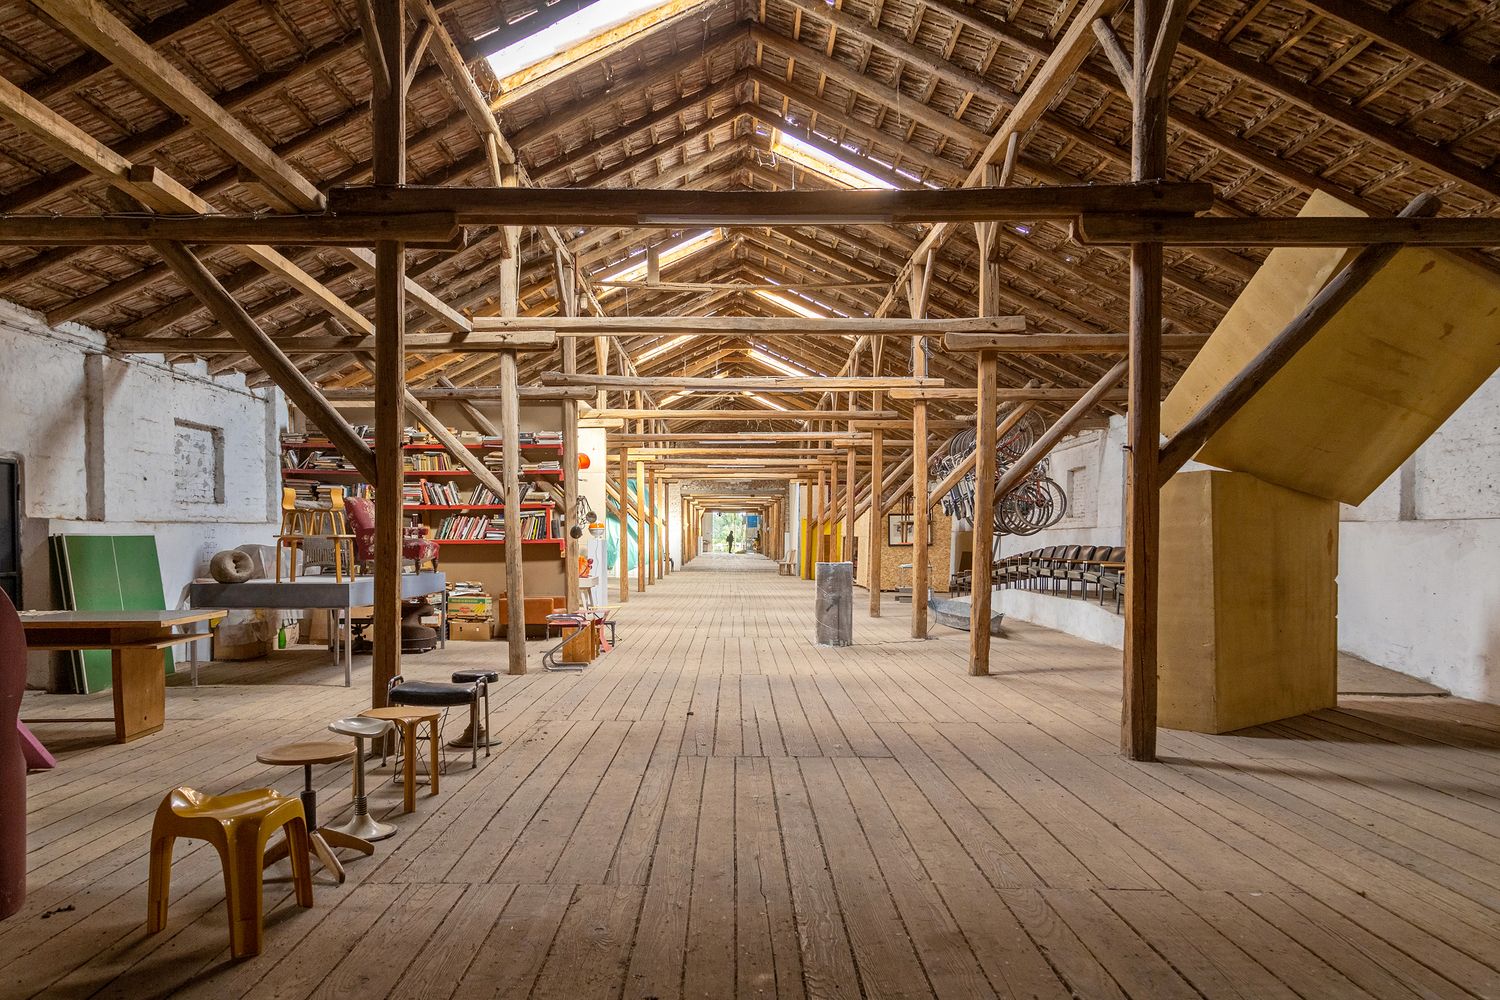 Old barn transformed into a space for art | Milan Mijalkovic